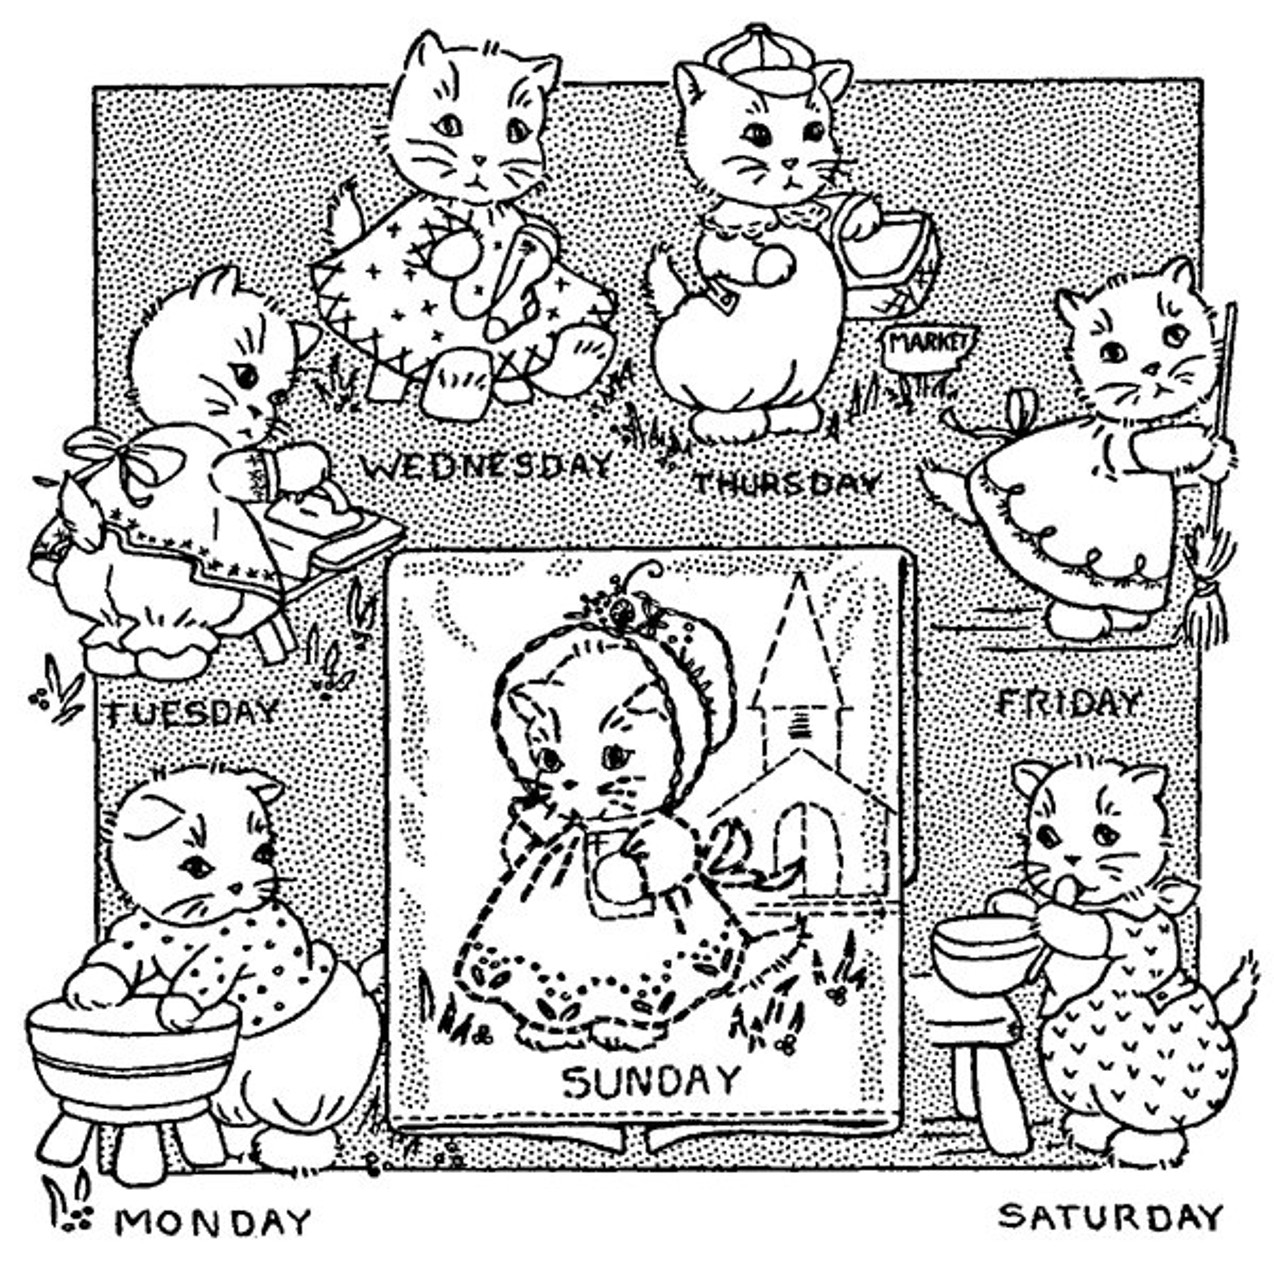 Embroidery Transfer Pattern #3183 Sparky the Kitten